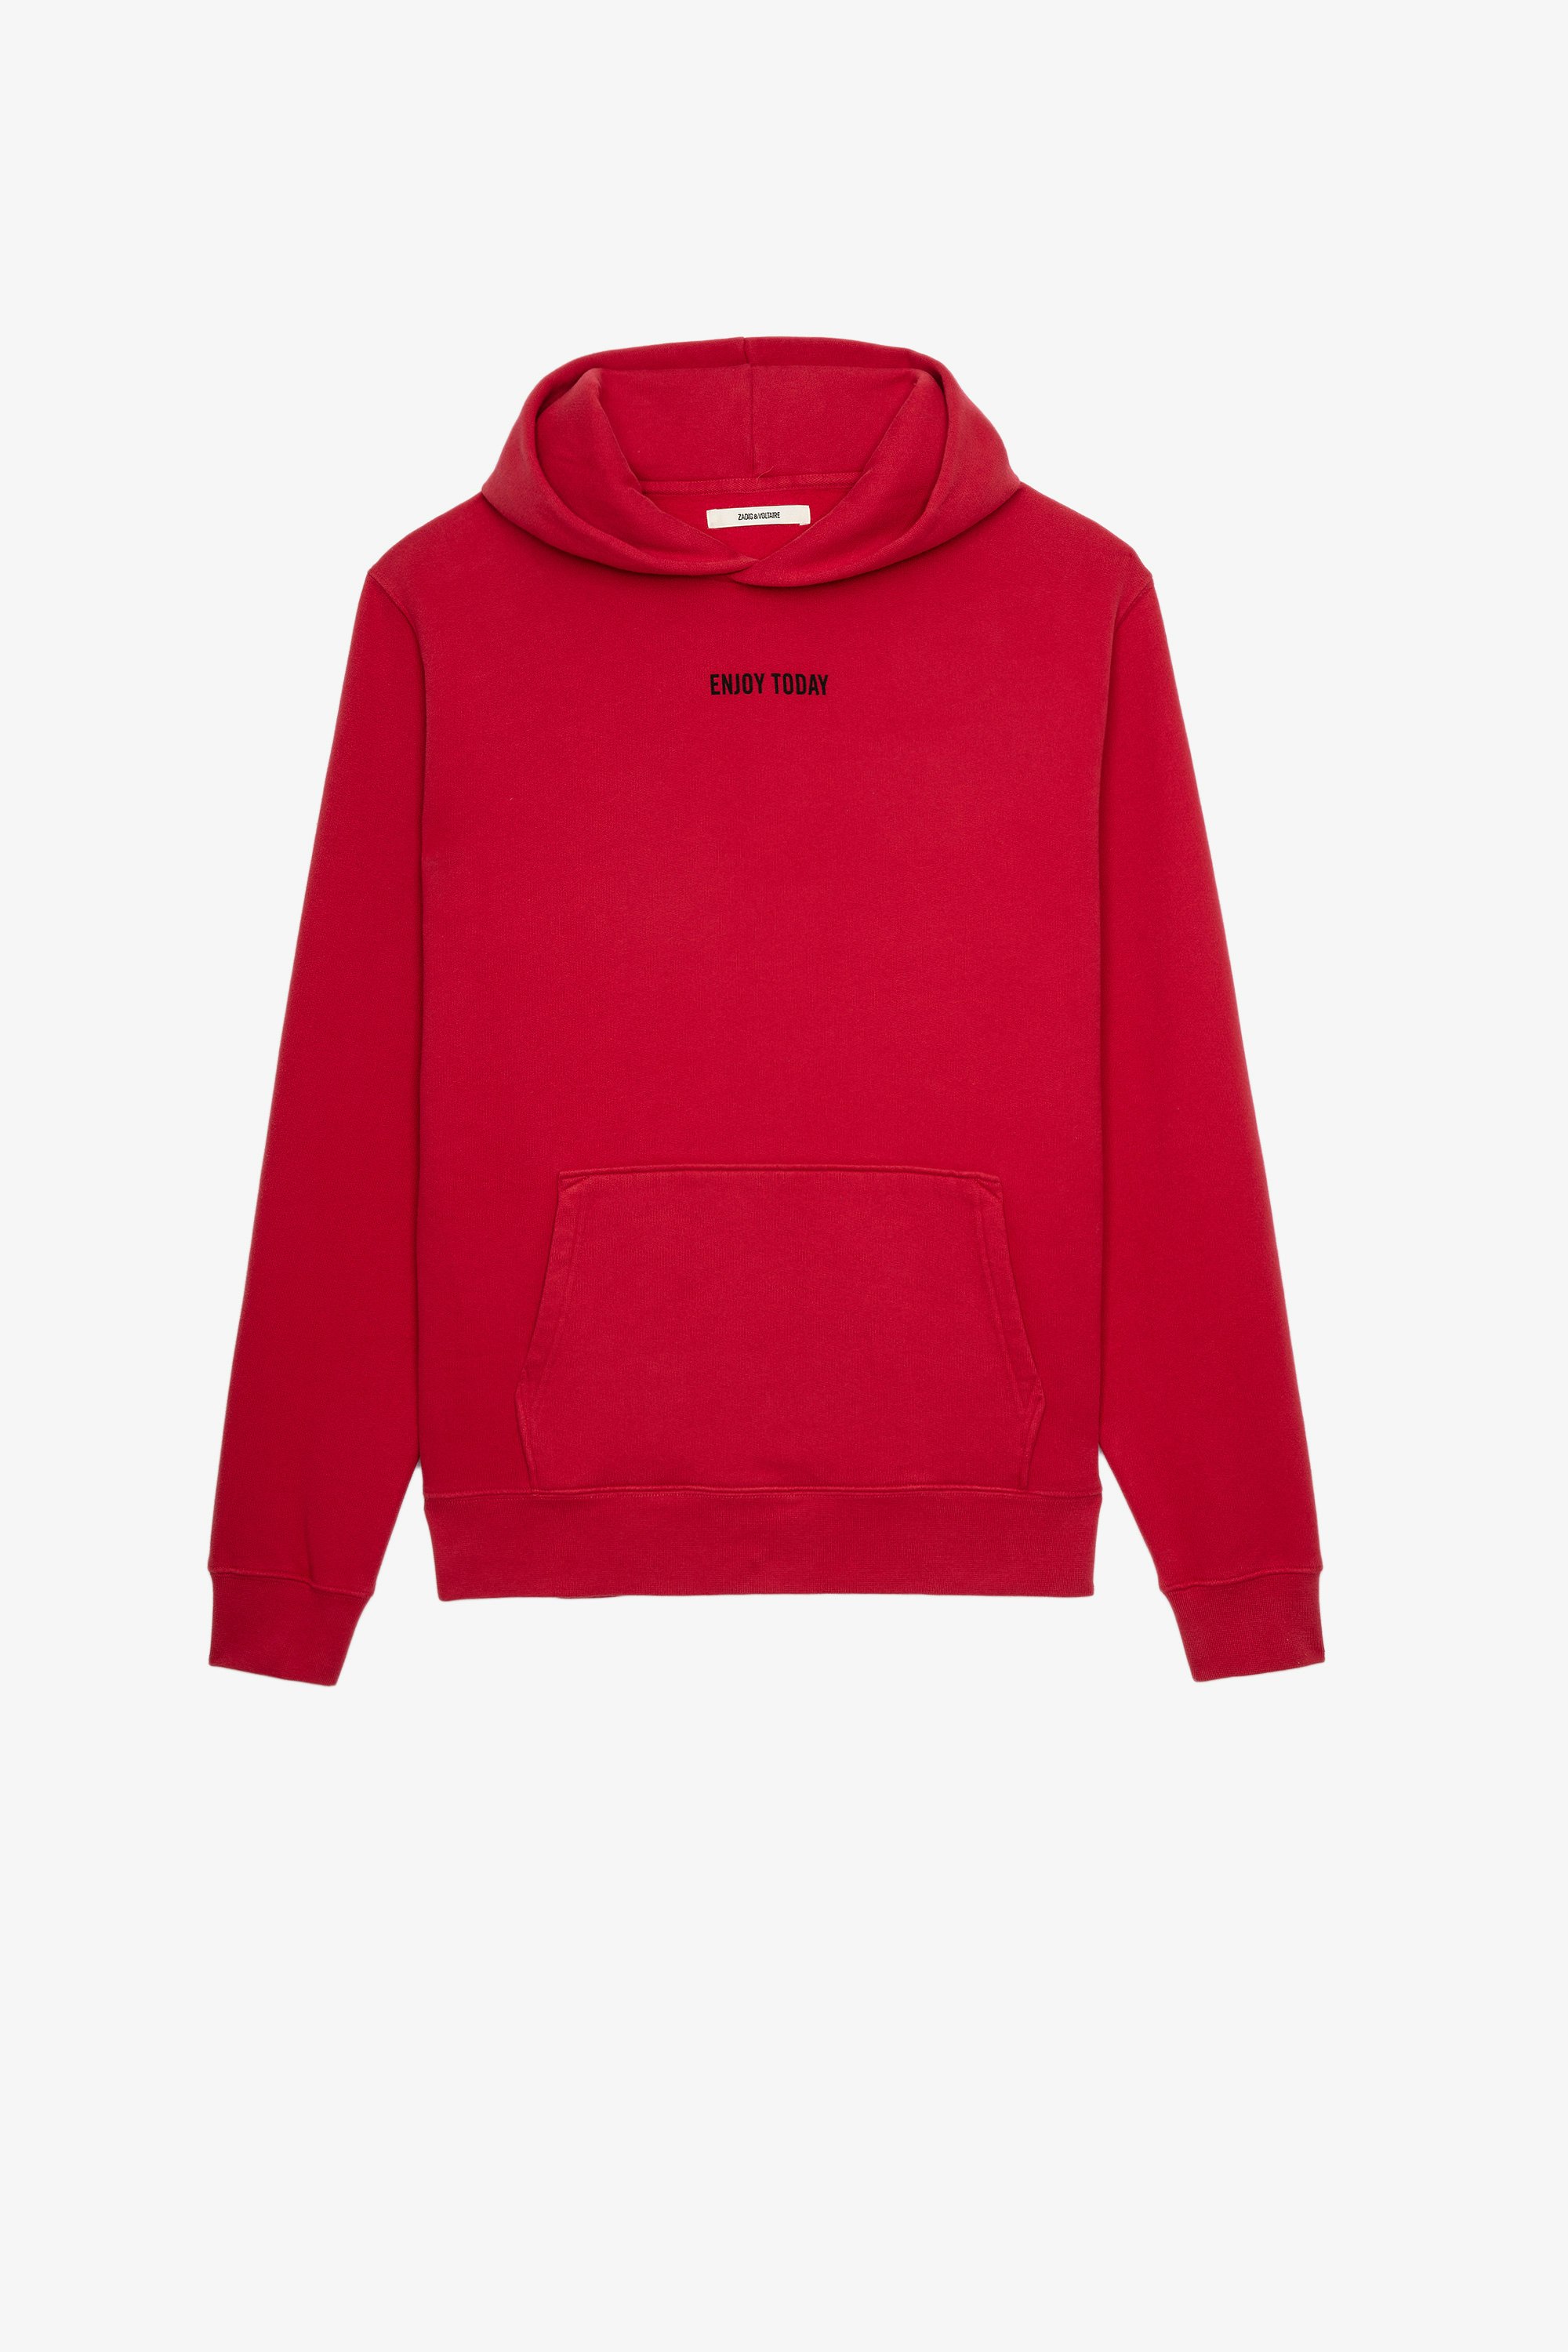 Sanchi フォトプリント スウェット Men’s red cotton sweatshirt with photoprint on back